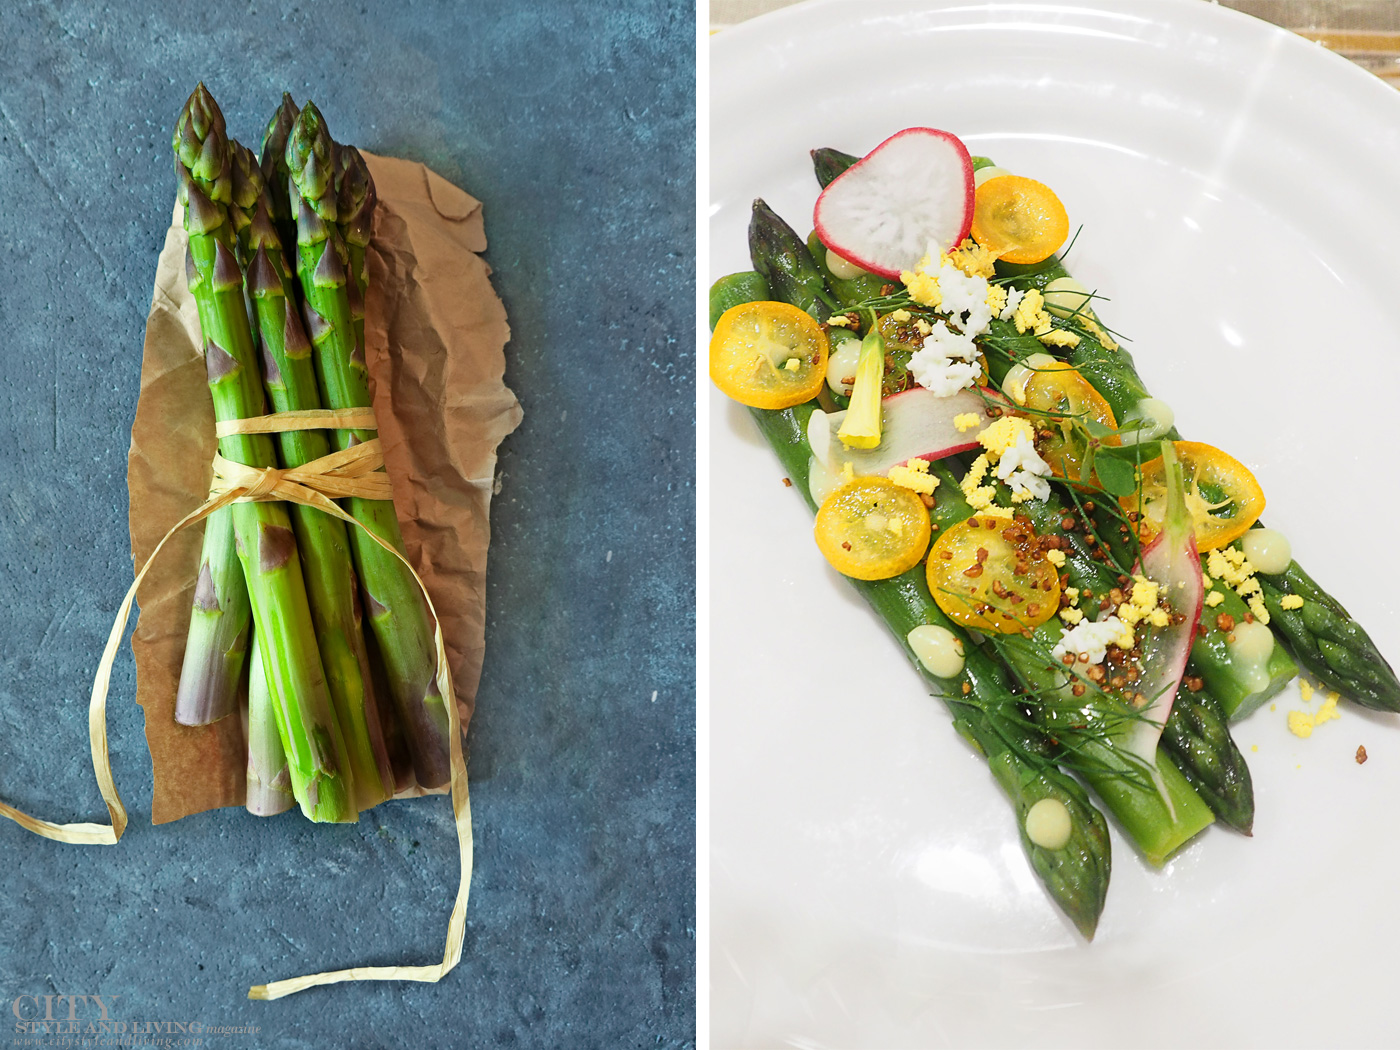 City Style and Living Spring 2021 Quick Asparagus Salad